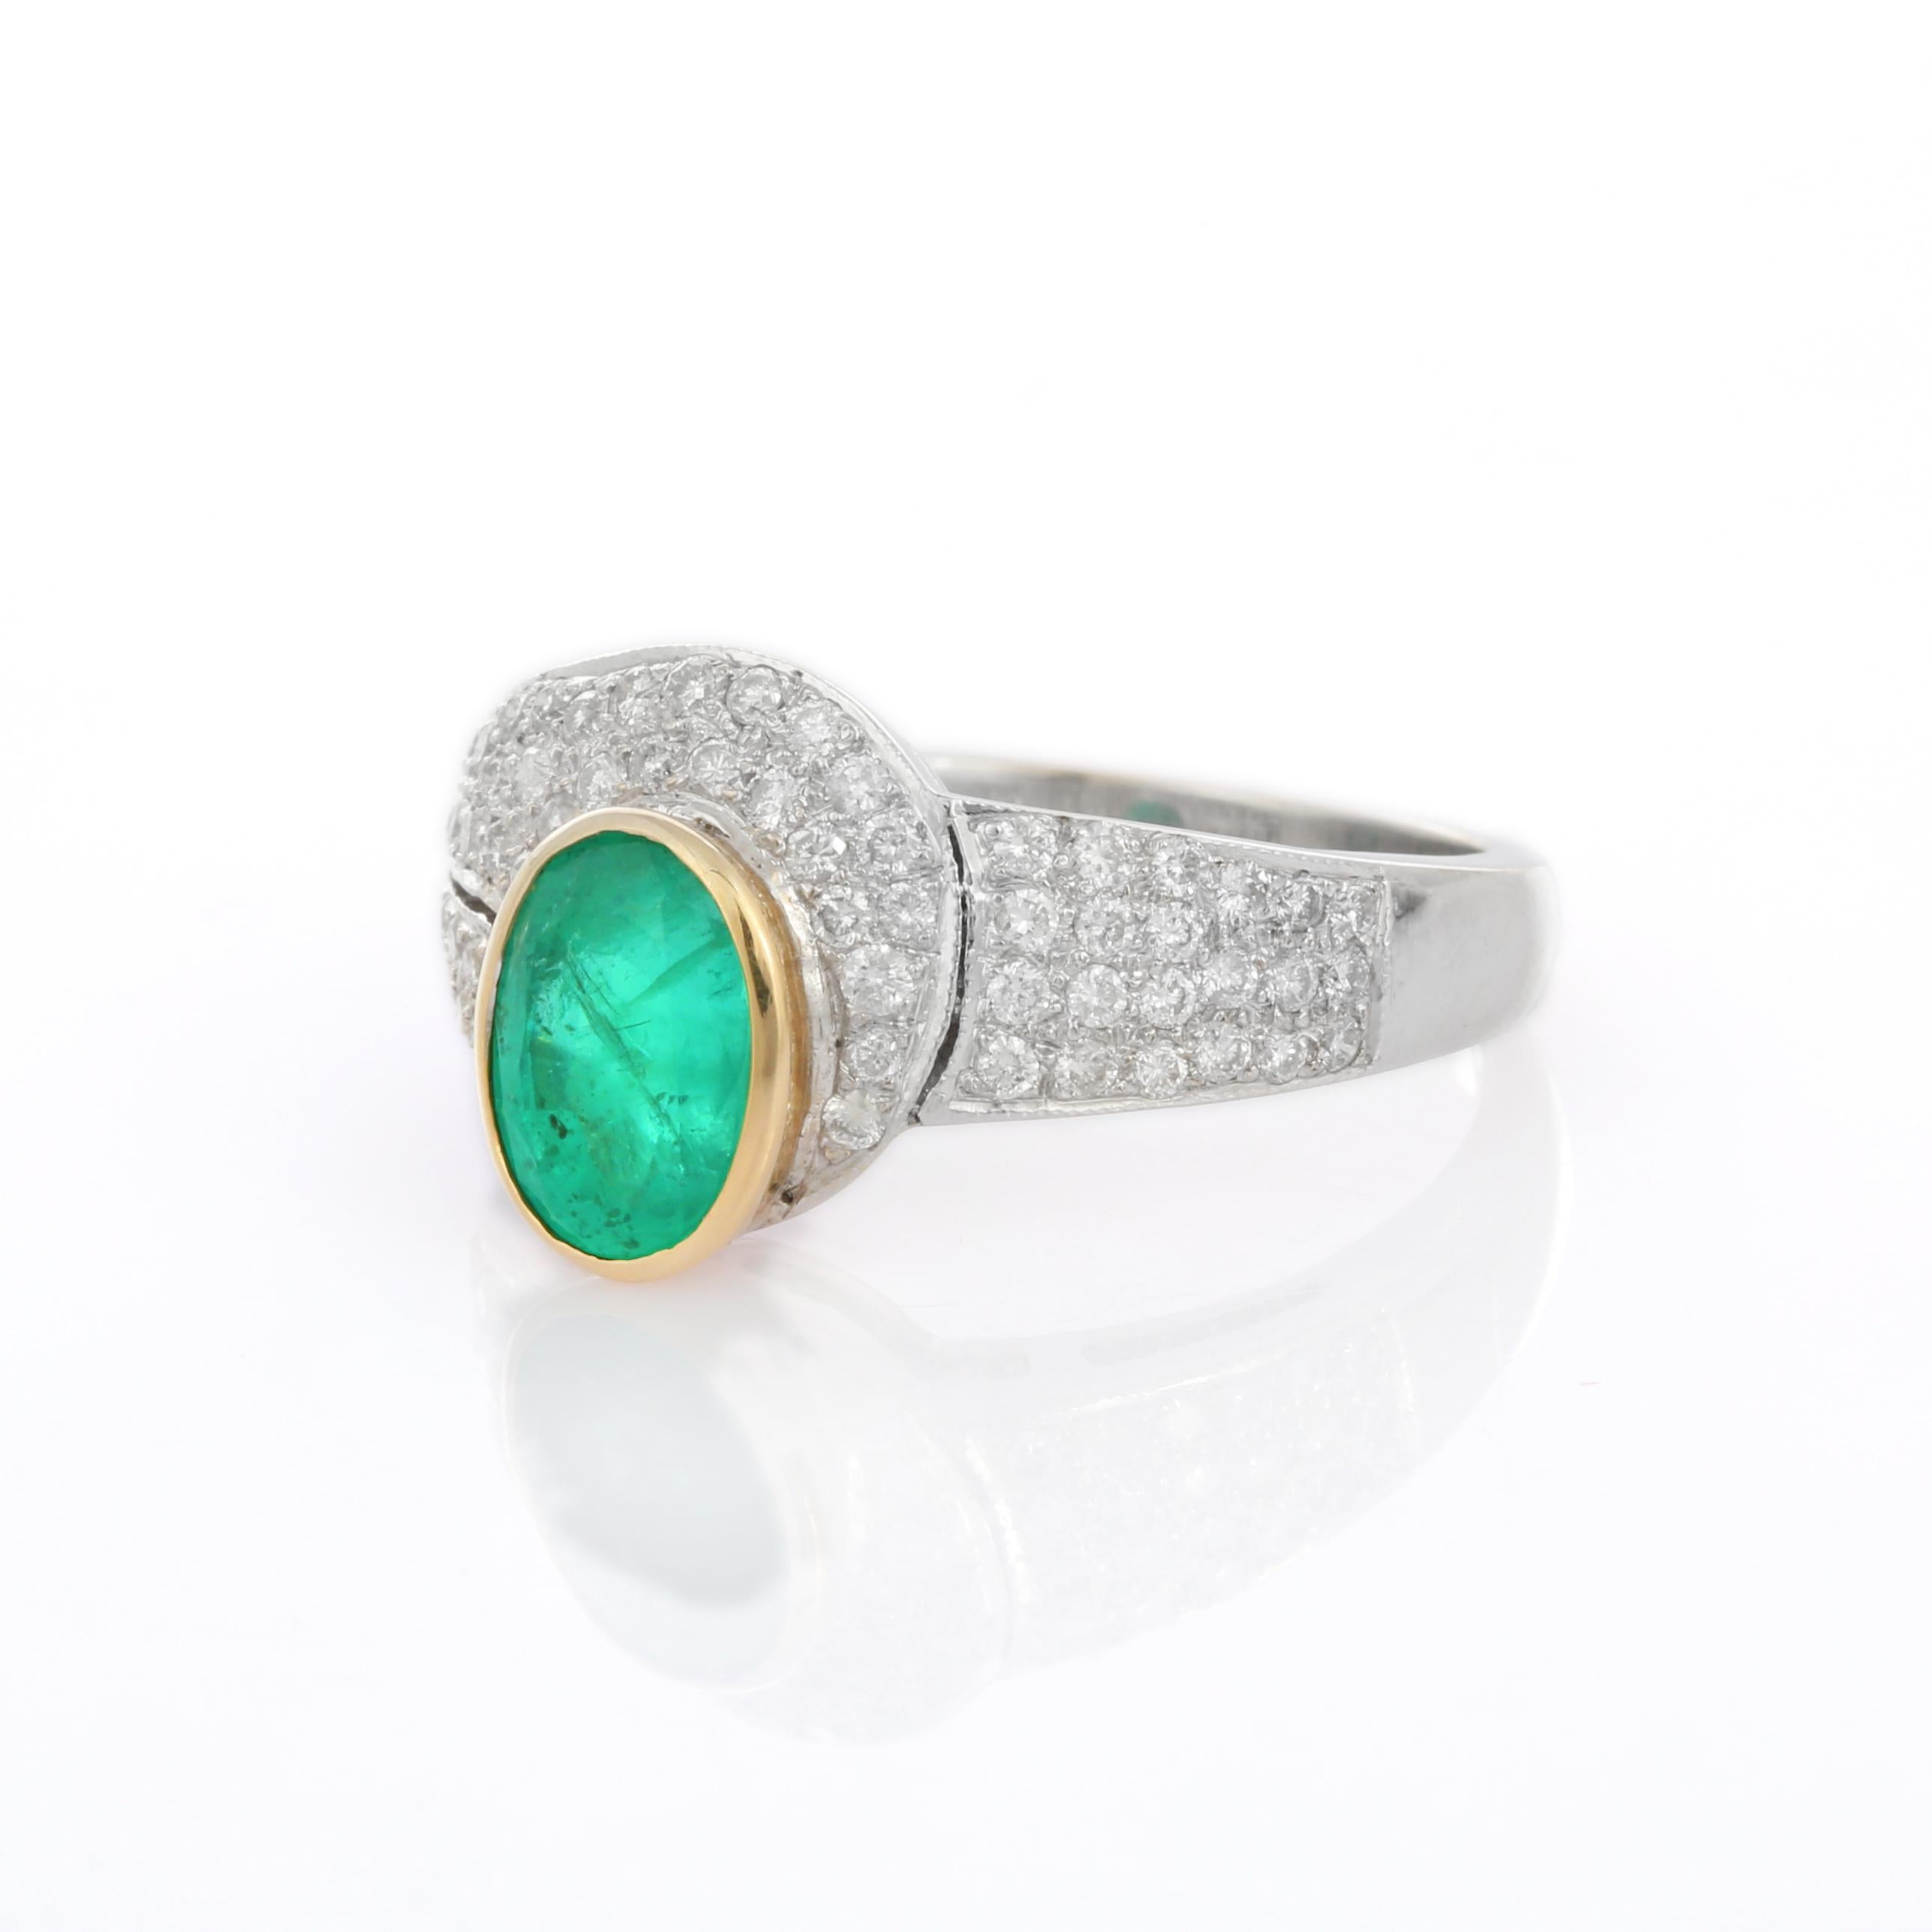 For Sale:  2.45 Carat Emerald and Diamond Ring in 18K White Gold  6